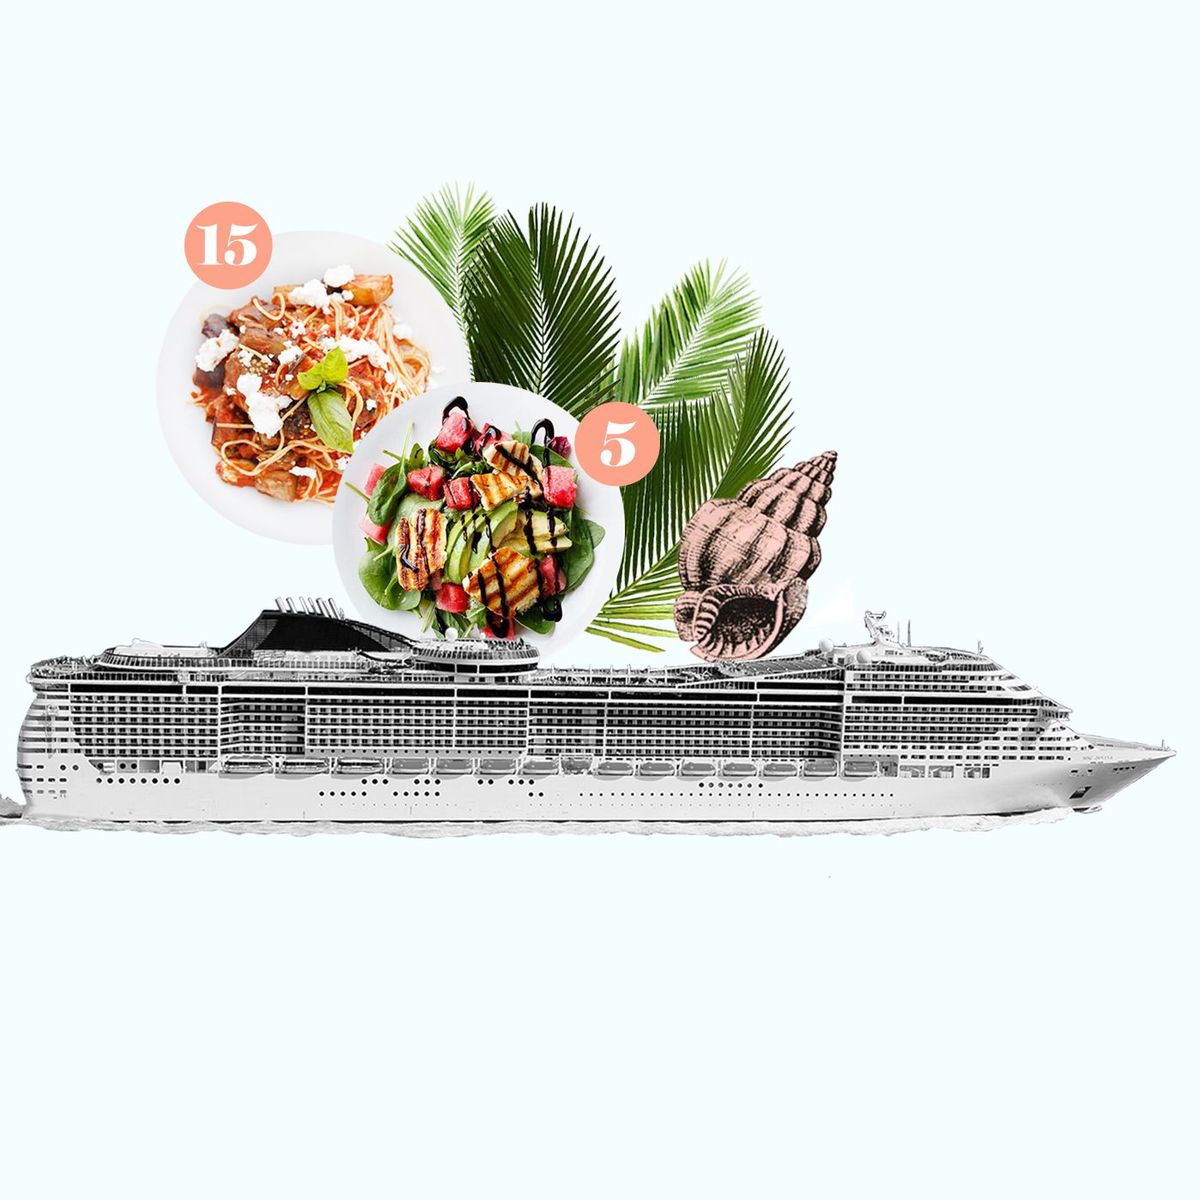 Weight Watchers Cruise - What It's Like to Diet on Vacation | Marie Claire